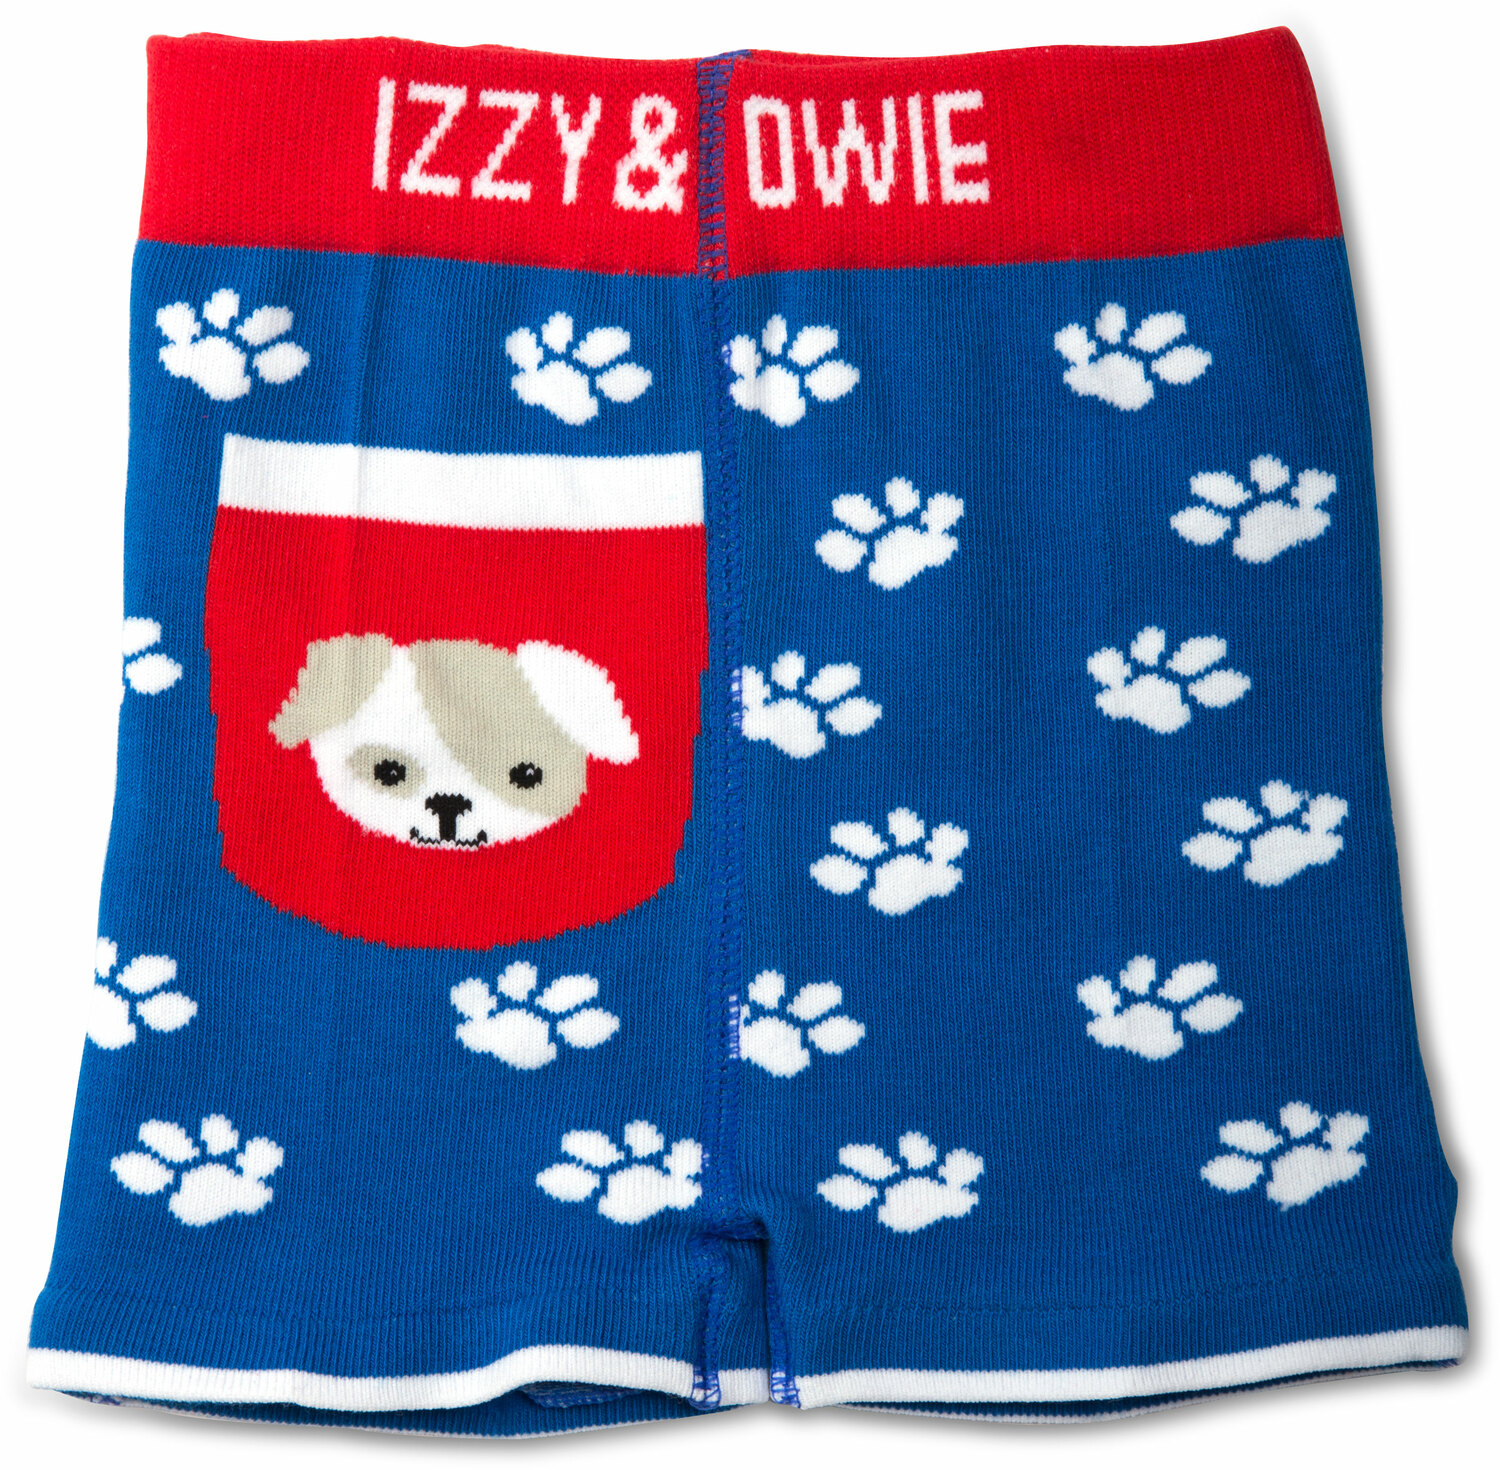 Red and Blue Puppy by Izzy & Owie - Red and Blue Puppy - 6-12 Months Baby Shorts